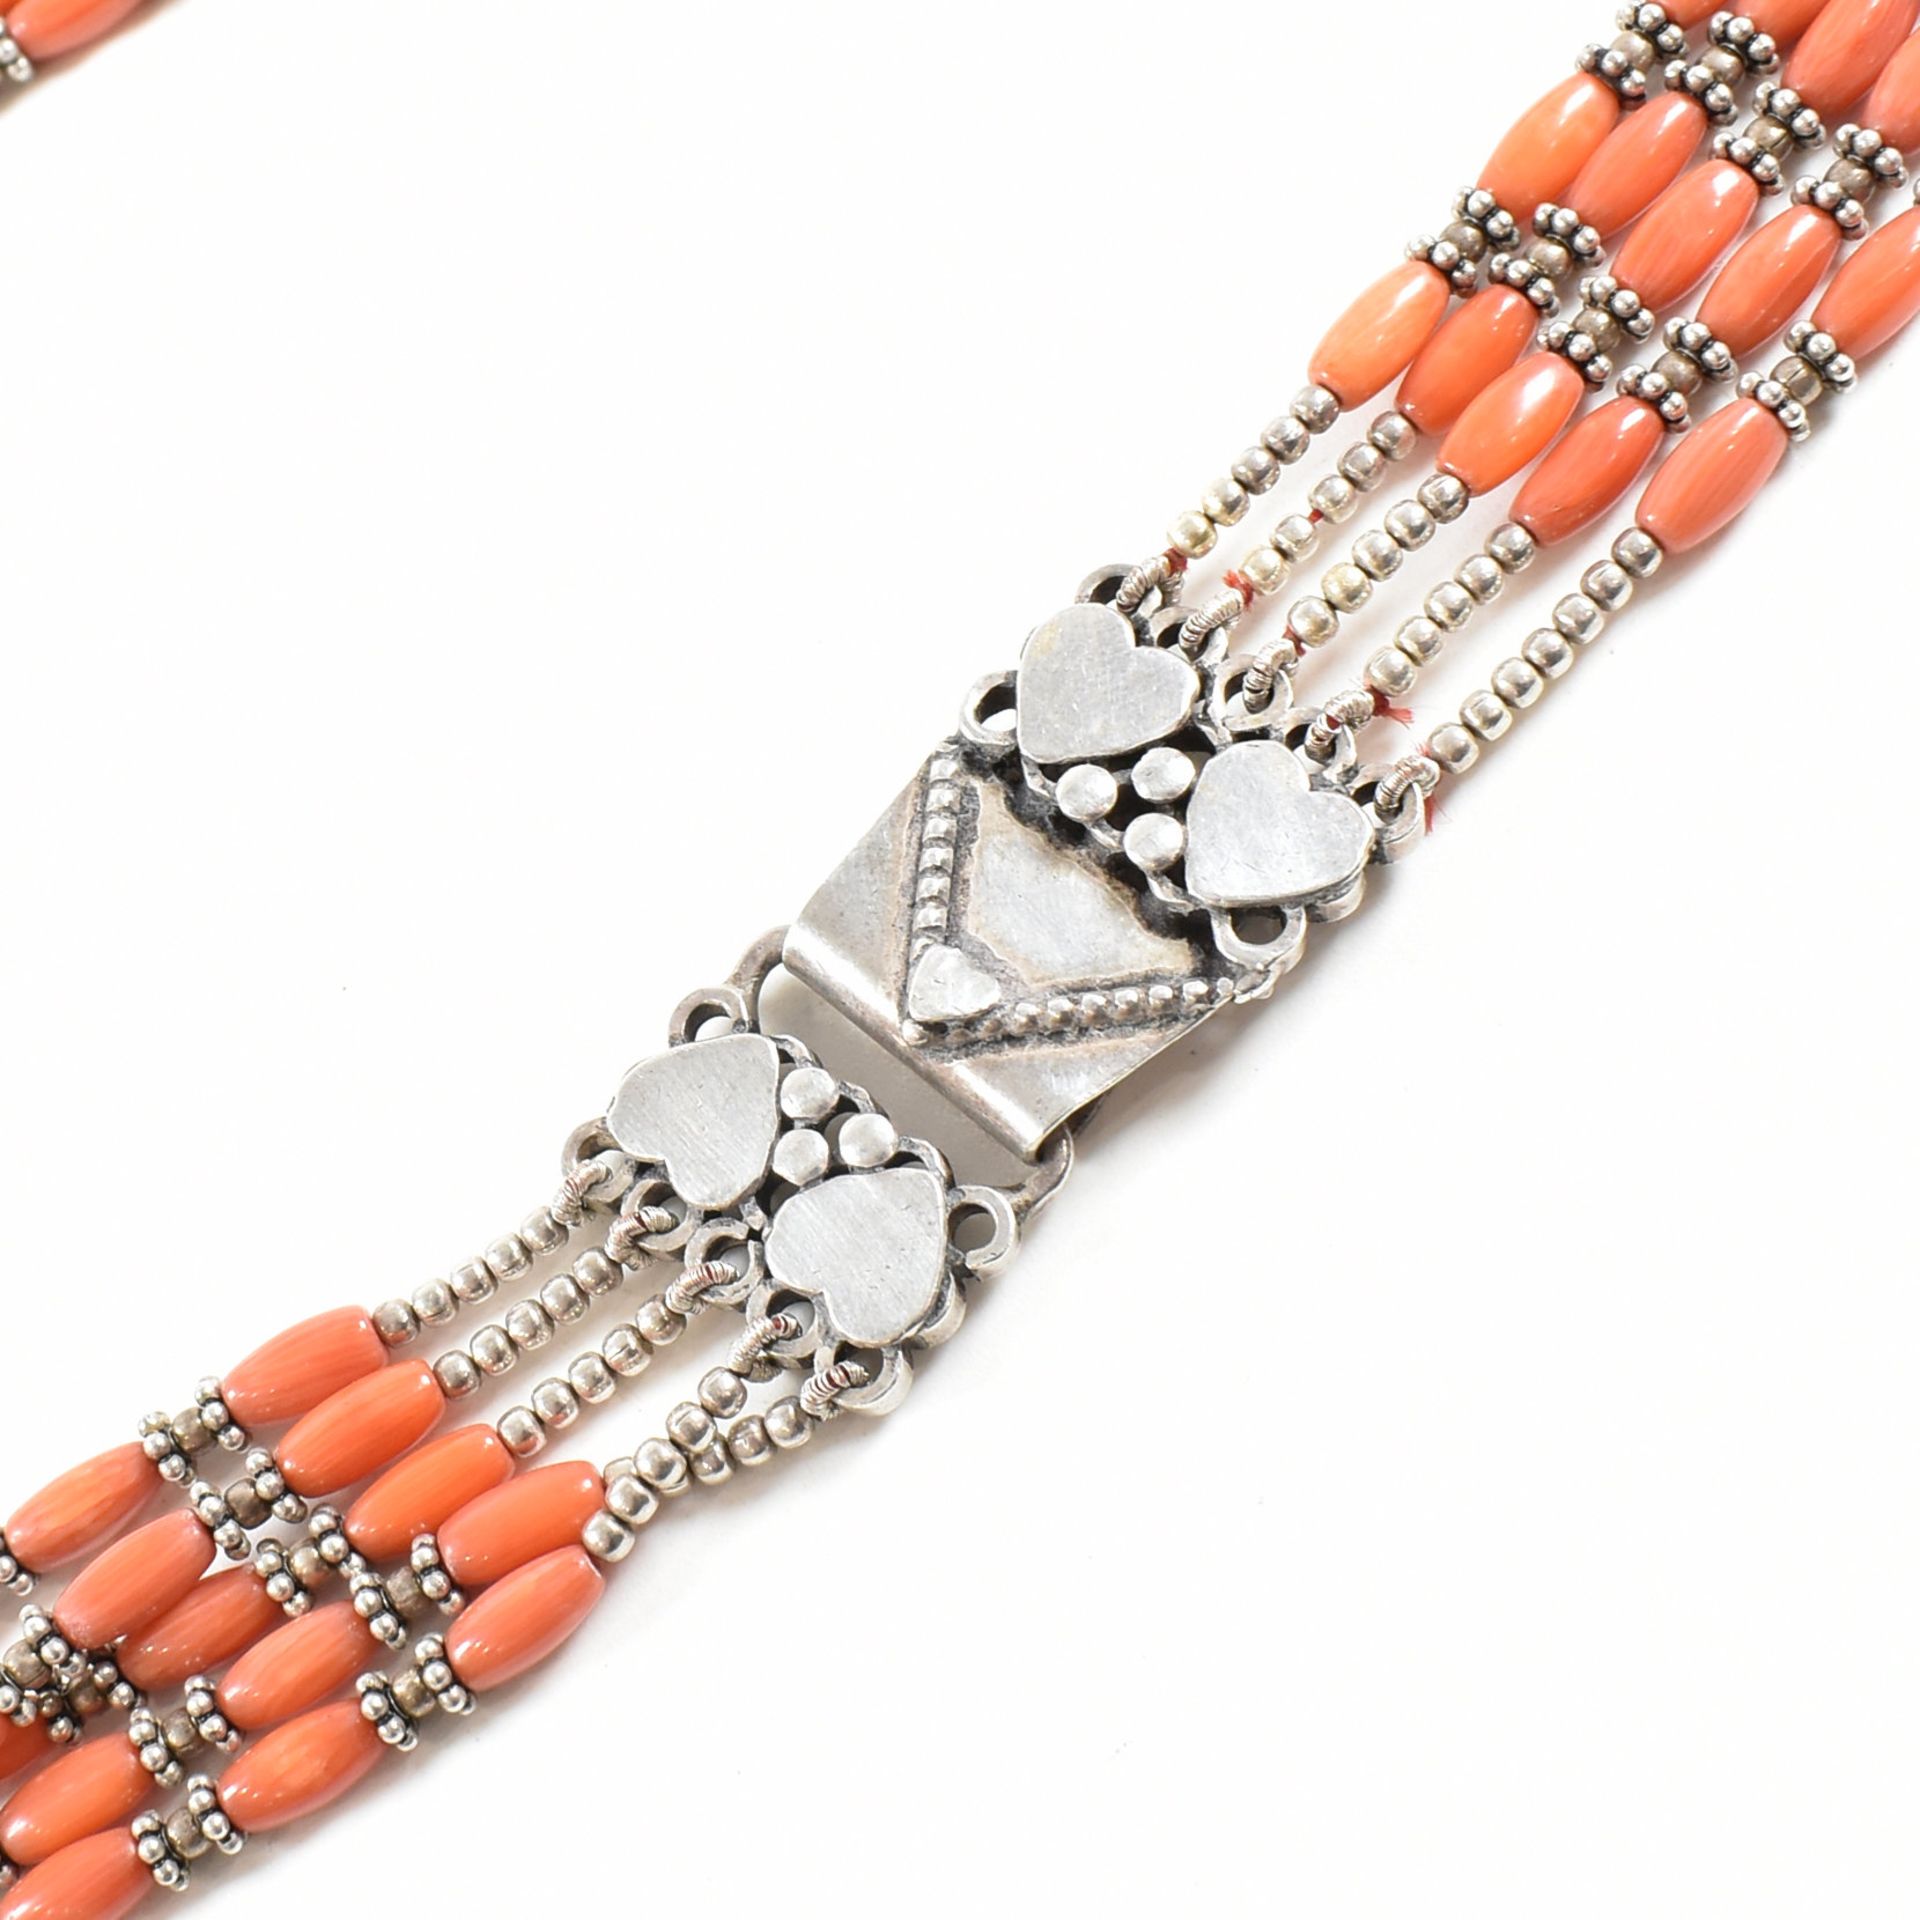 925 SILVER & CORAL 5 STRAND BEADED NECKLACE - Image 4 of 5